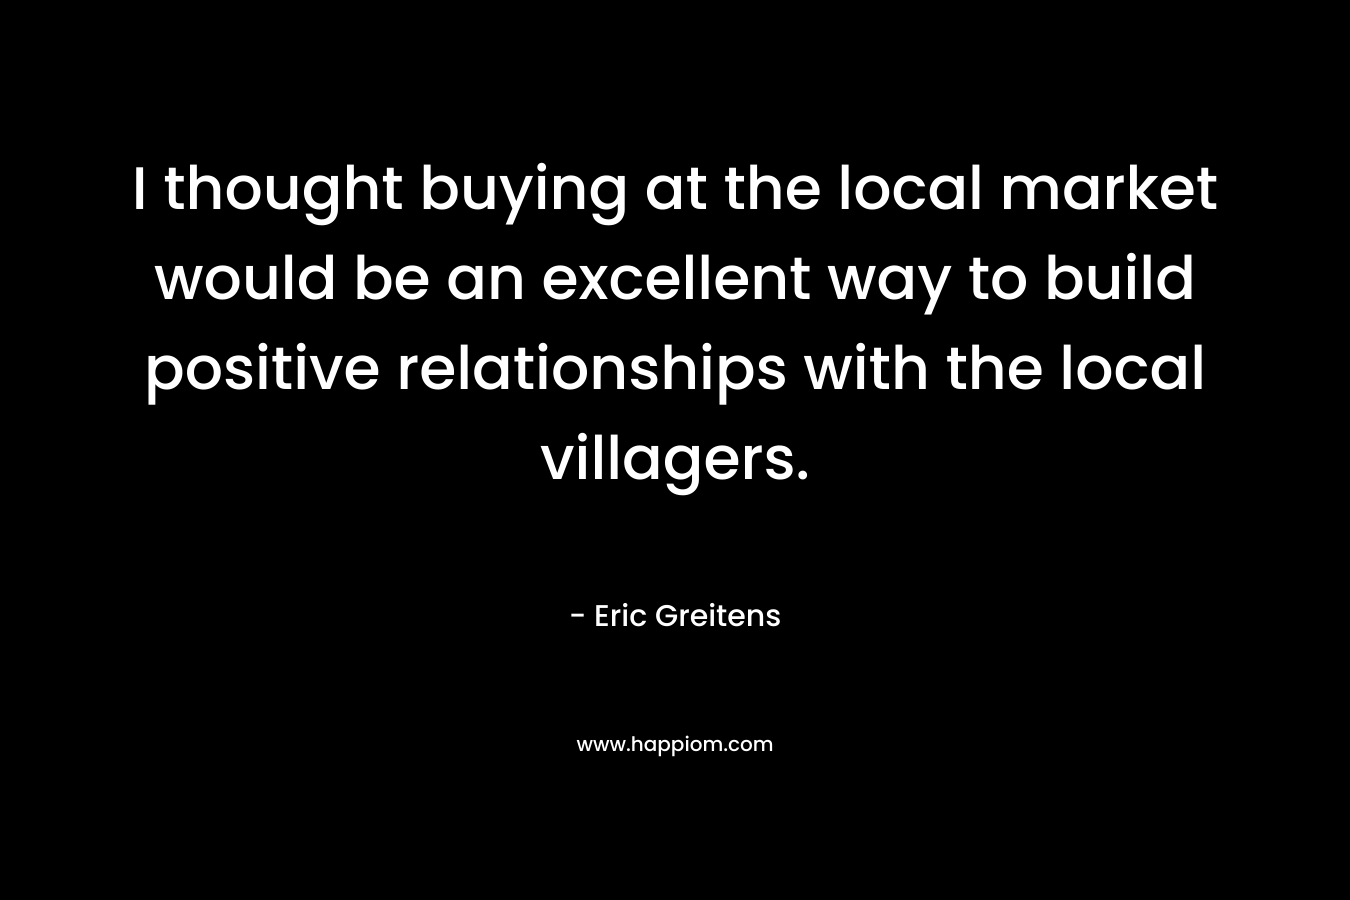 I thought buying at the local market would be an excellent way to build positive relationships with the local villagers.